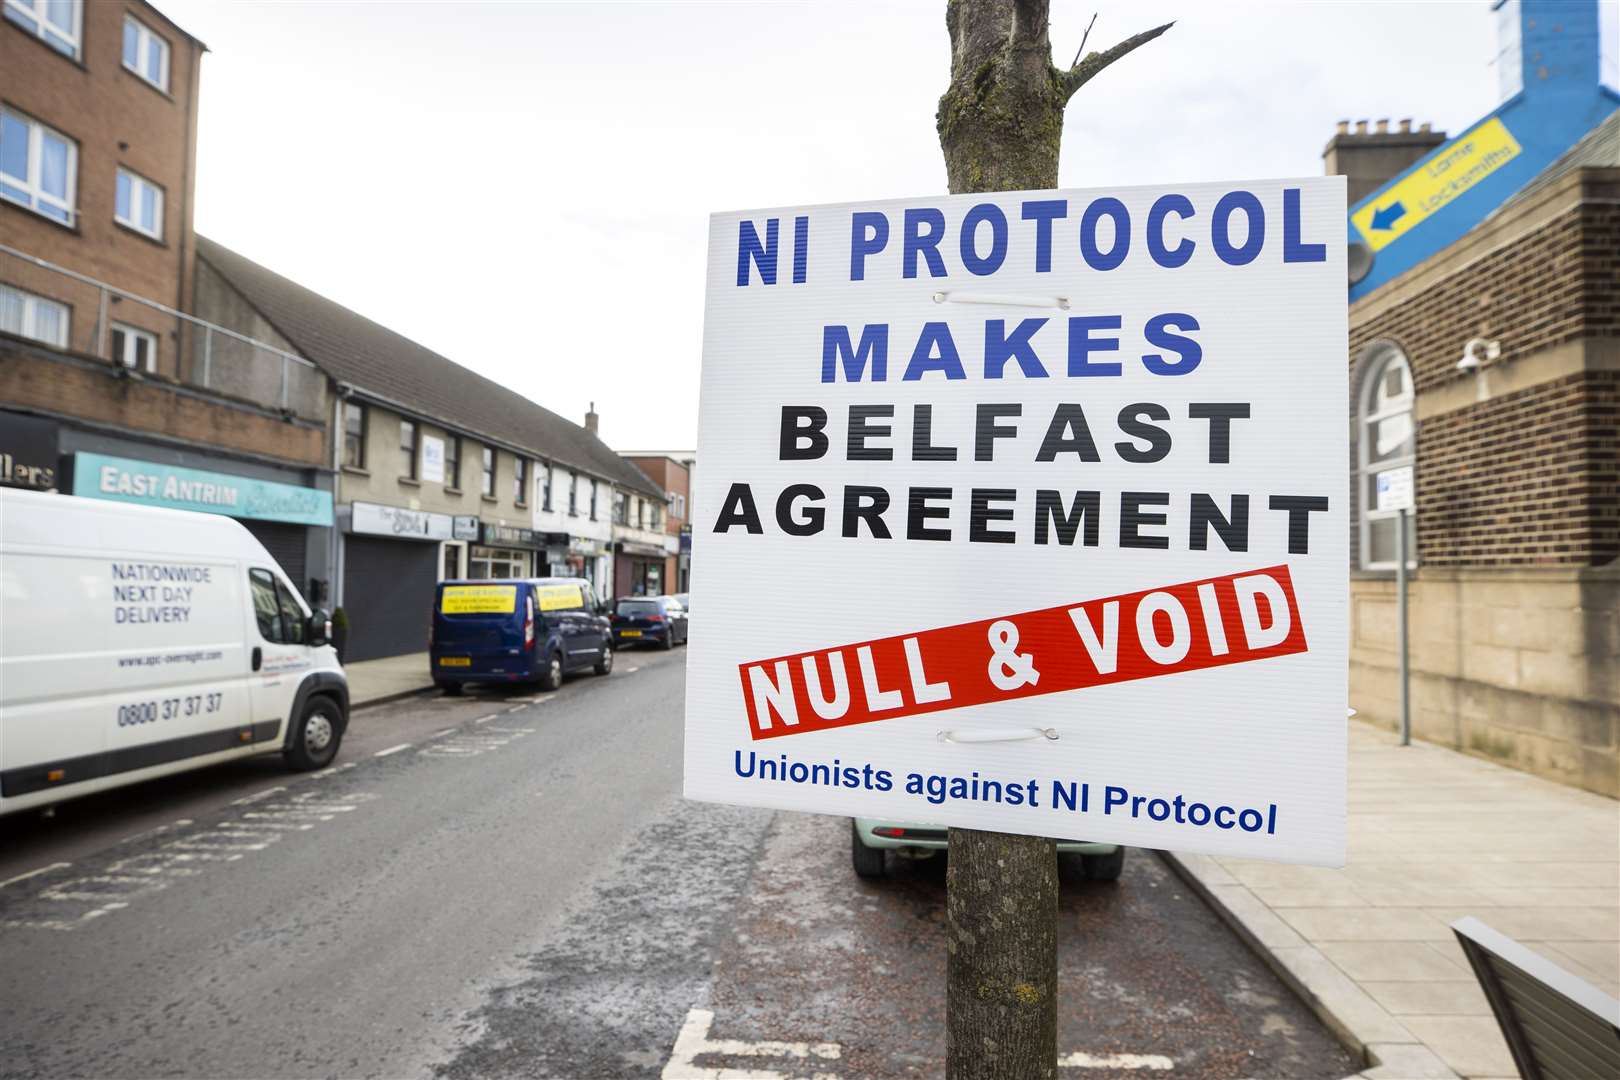 A sign in Larne protesting against the Northern Ireland Protocol (Liam McBurney/PA)